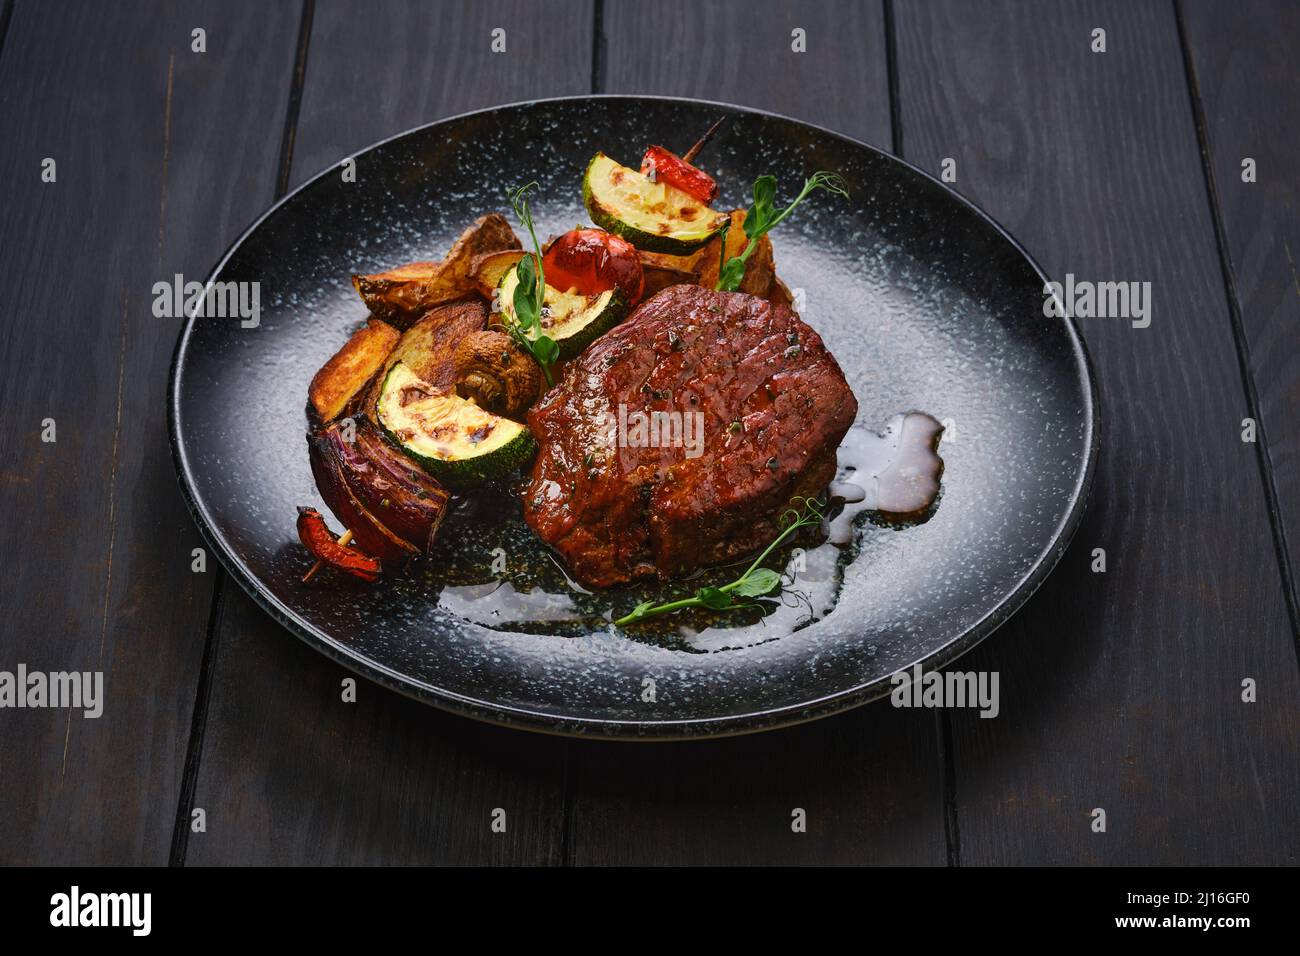 Juicy beef steak with potato wedges and grilled vegetables on skewer Stock Photo